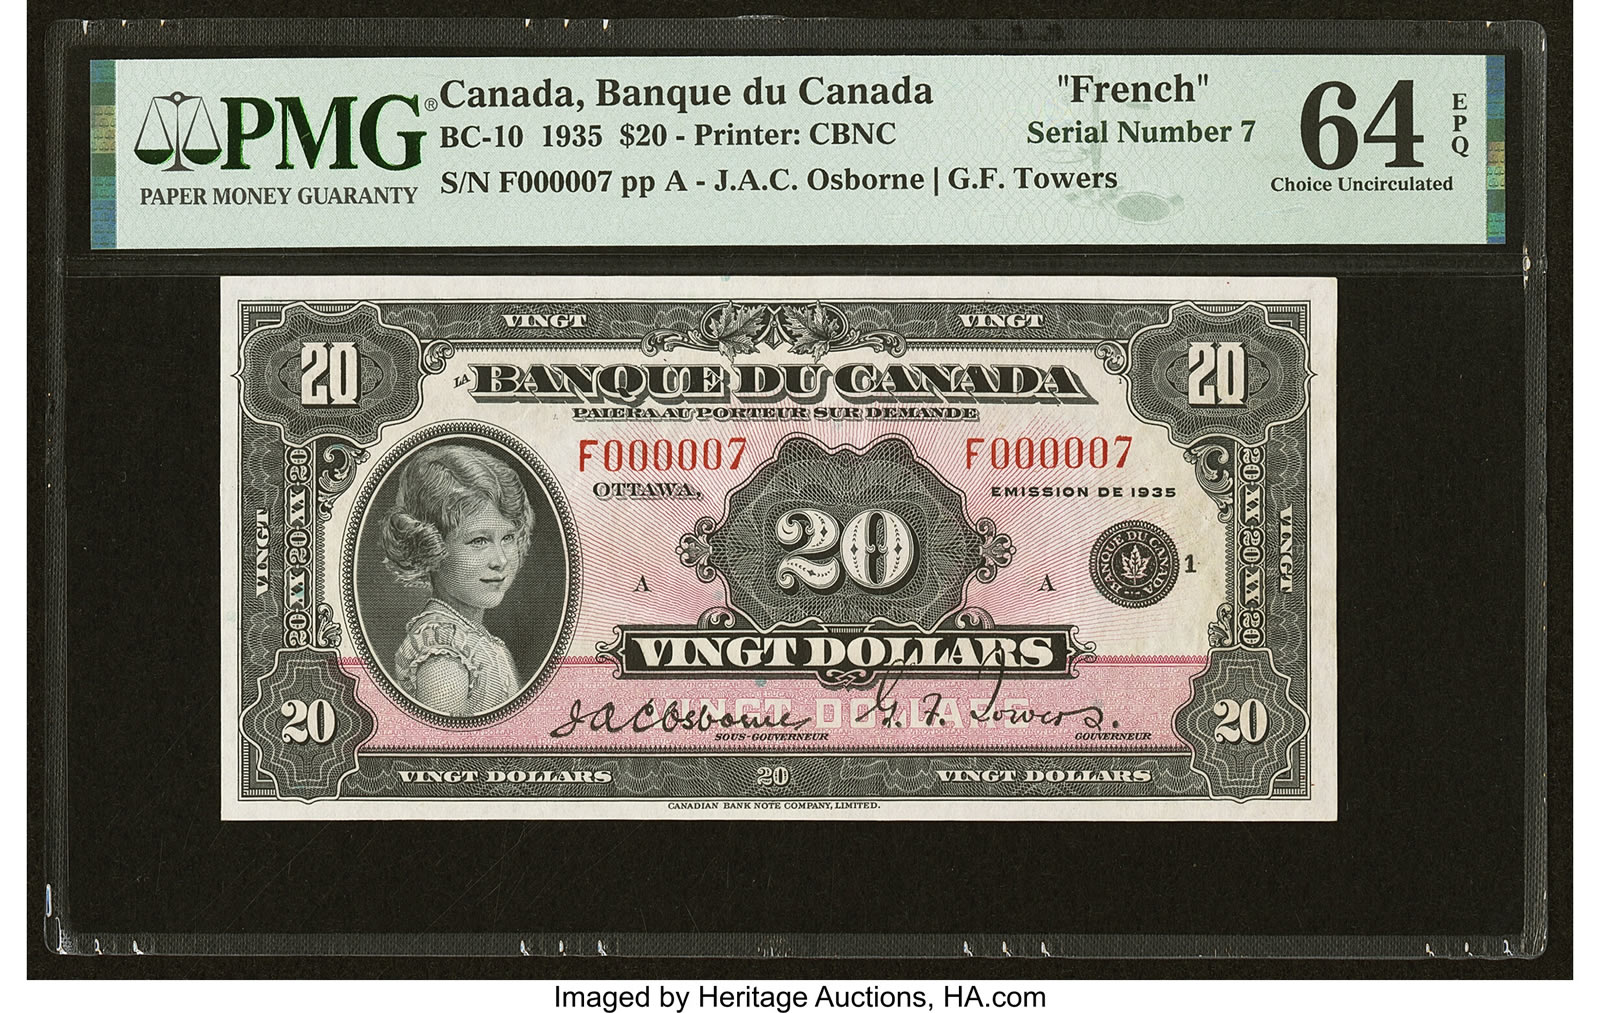 https://www.coinnews.net/wp-content/uploads/2023/03/Serial-Number-7-Canada-Bank-of-Canada-20-1935-BC-10-French-Text-PMG-Choice-Uncirculated-64-EPQ-1.jpg